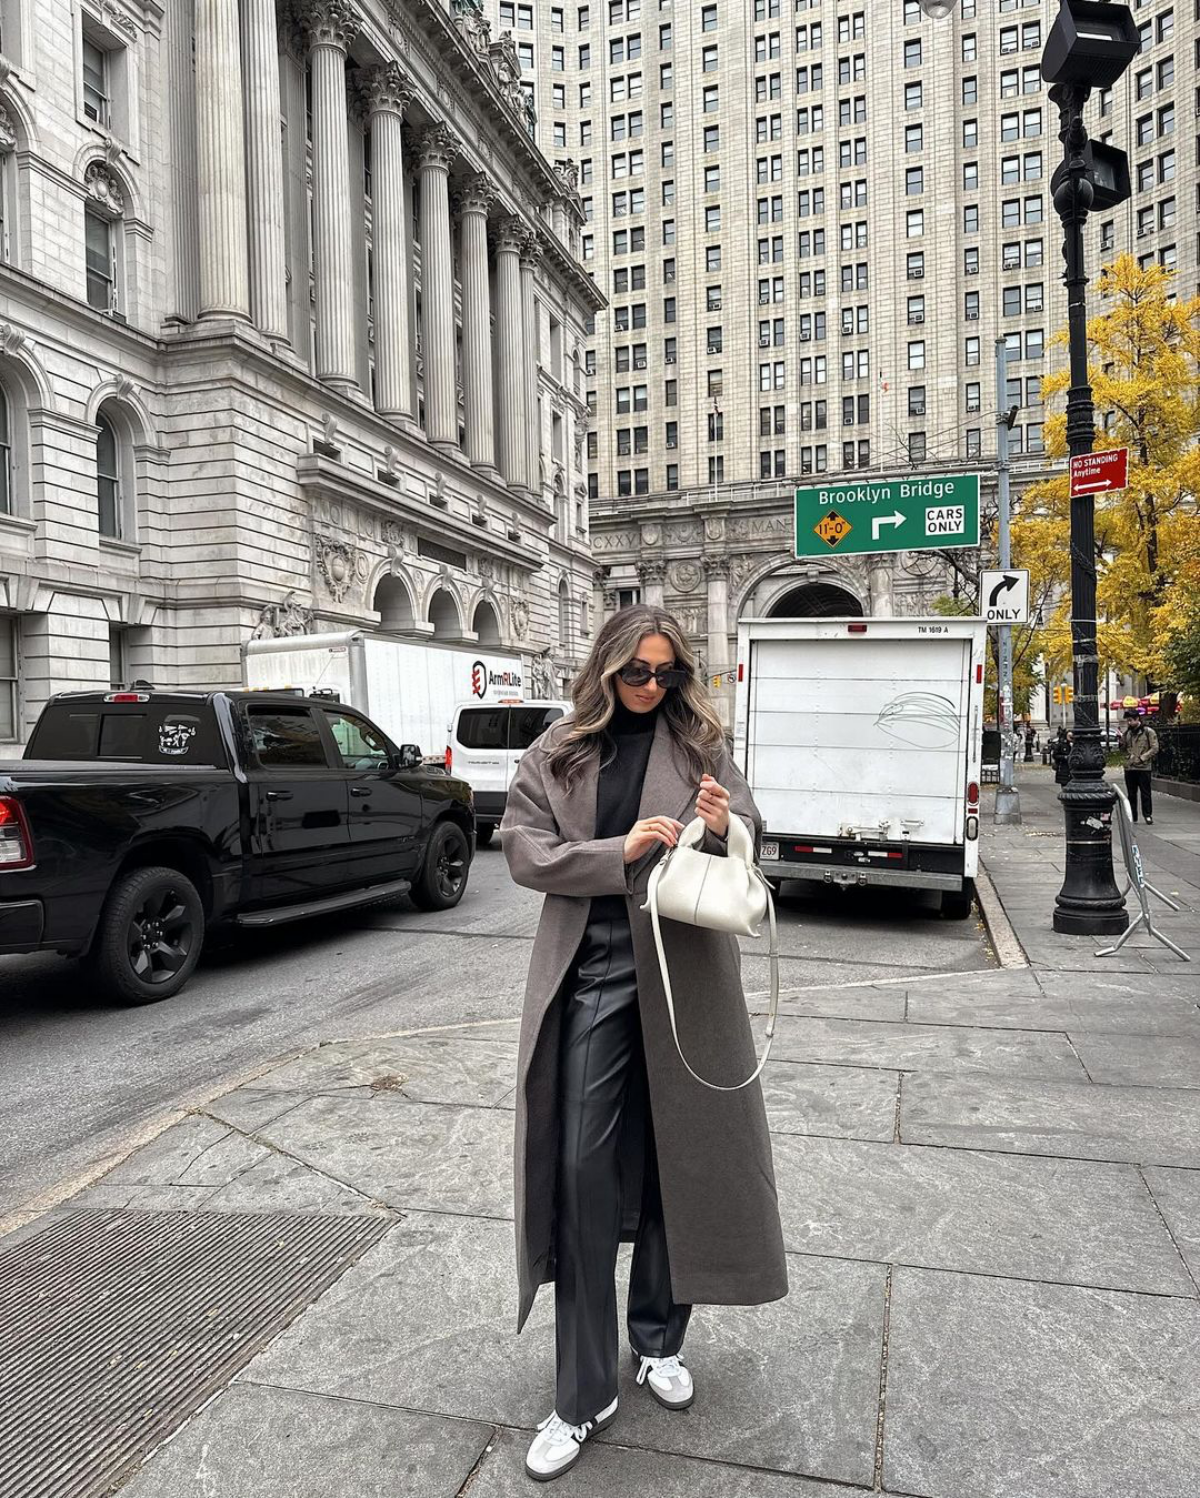 causal brunch outfit winter woman with jeans gray long coat look